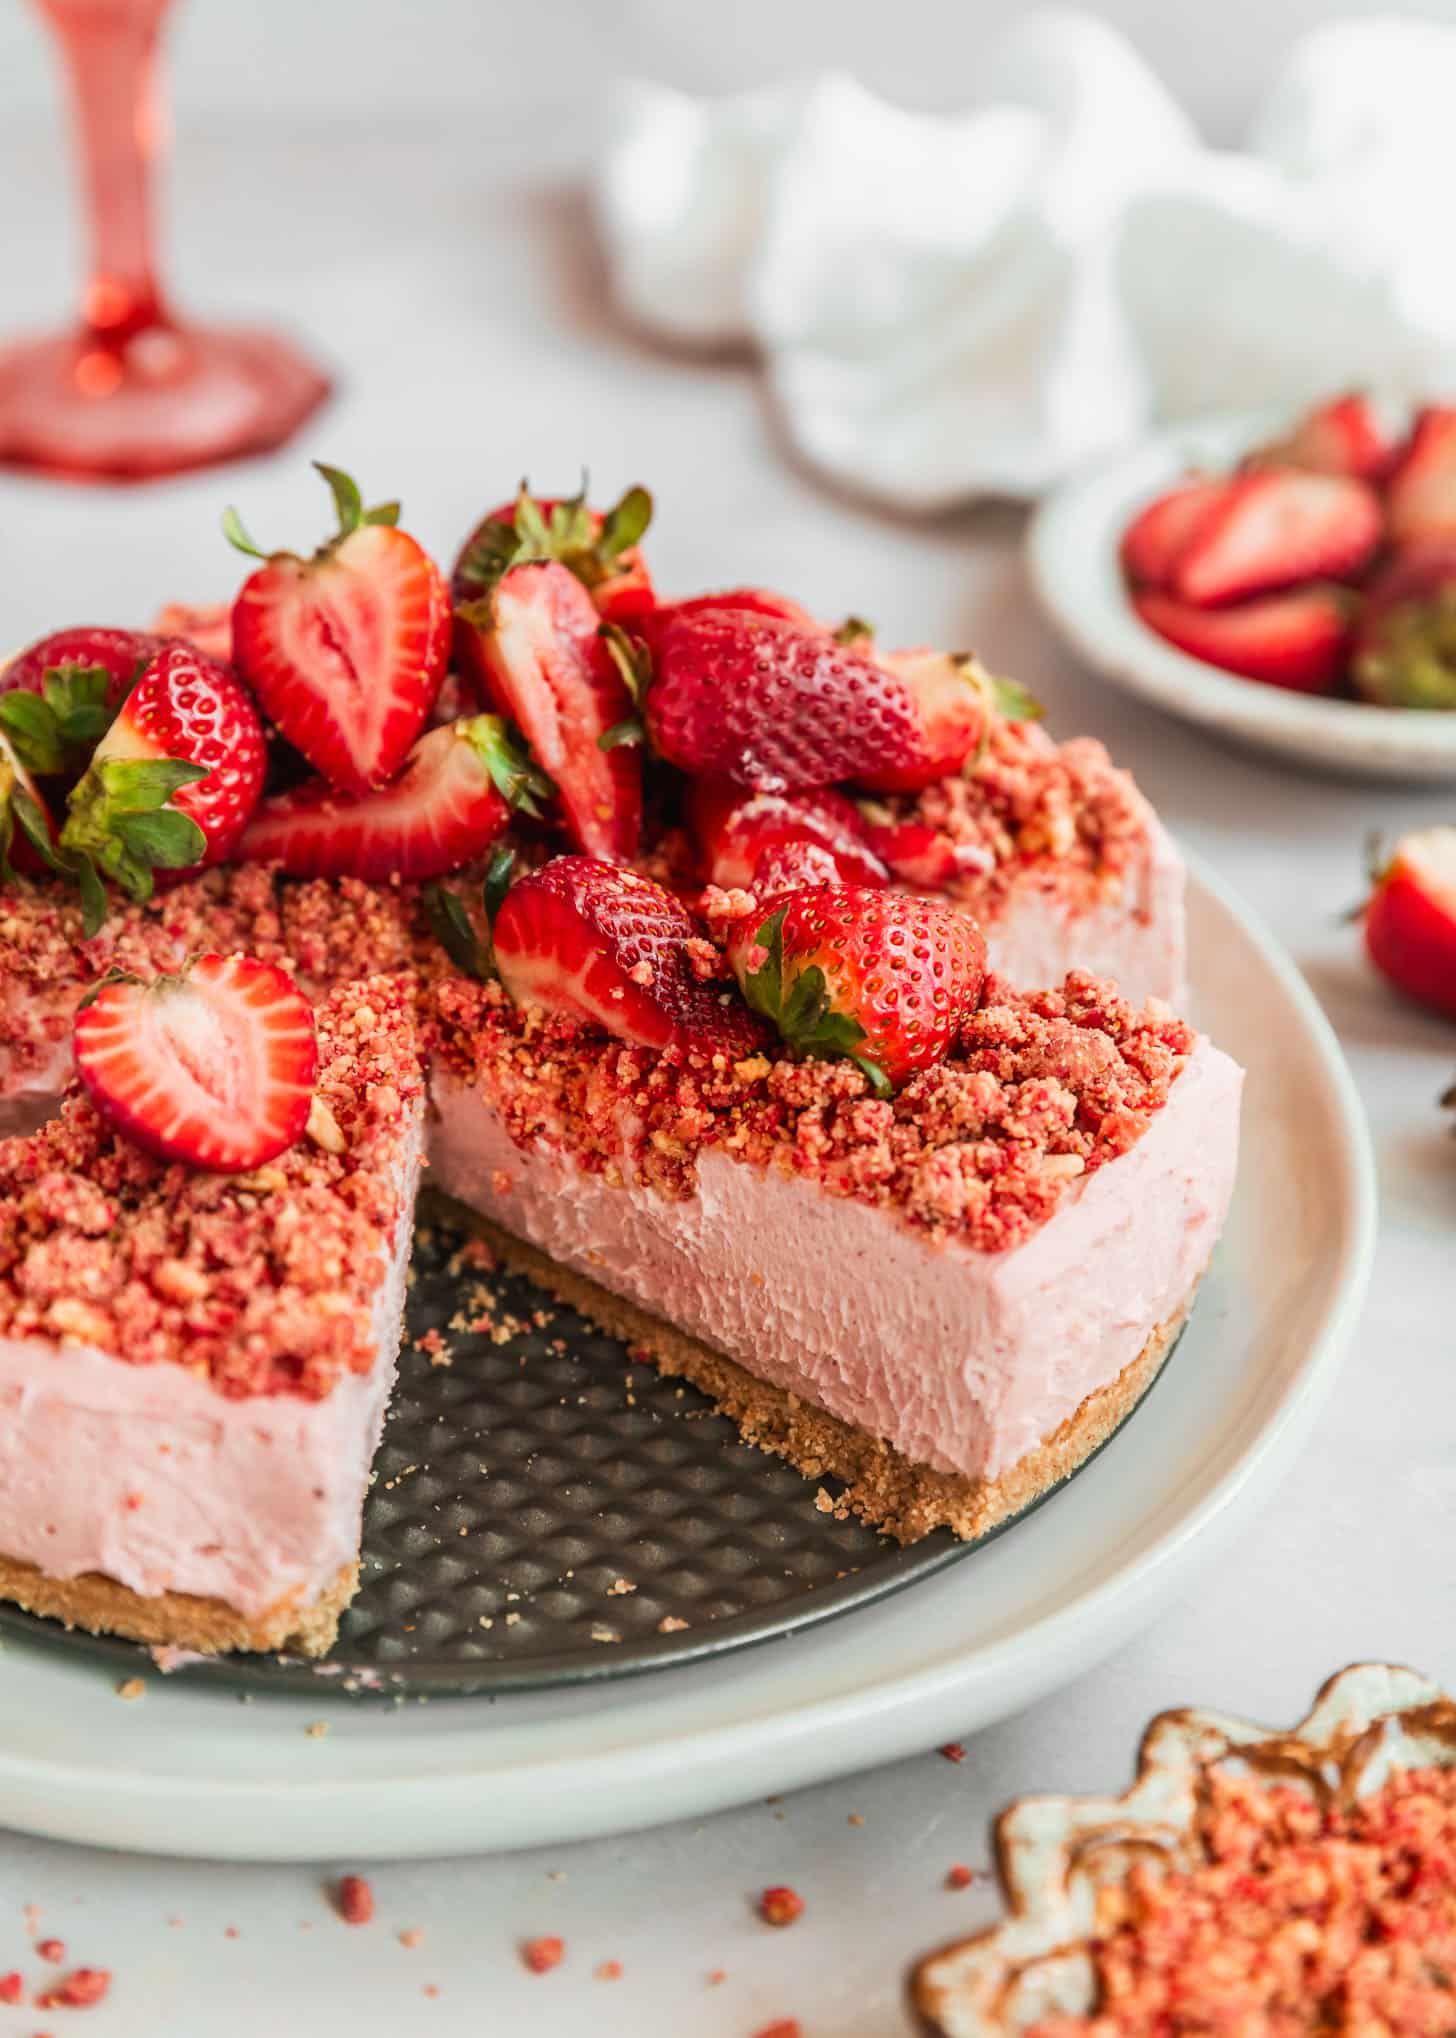 A sliced strawberry crunch cheesecake with fresh strawberries on a pink counter next to a white bowl of crunch, white bowl of strawberries, white linen, and a pink wine glass.